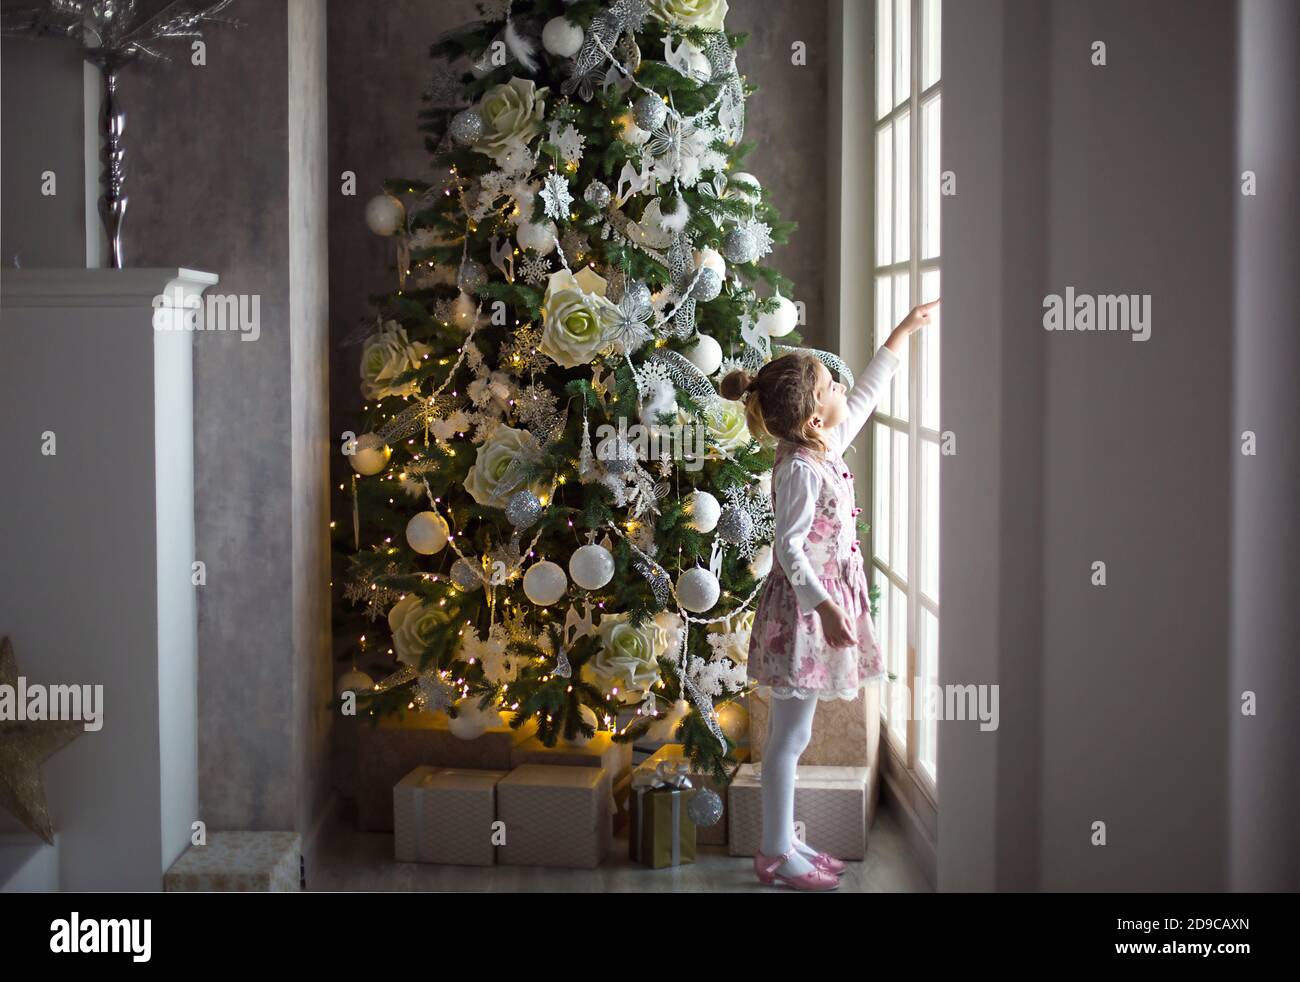 A little girl looks out of a large window near a Christmas tree. Waiting for a miracle, Christmas white decor in the living room of the house. New yea Stock Photo